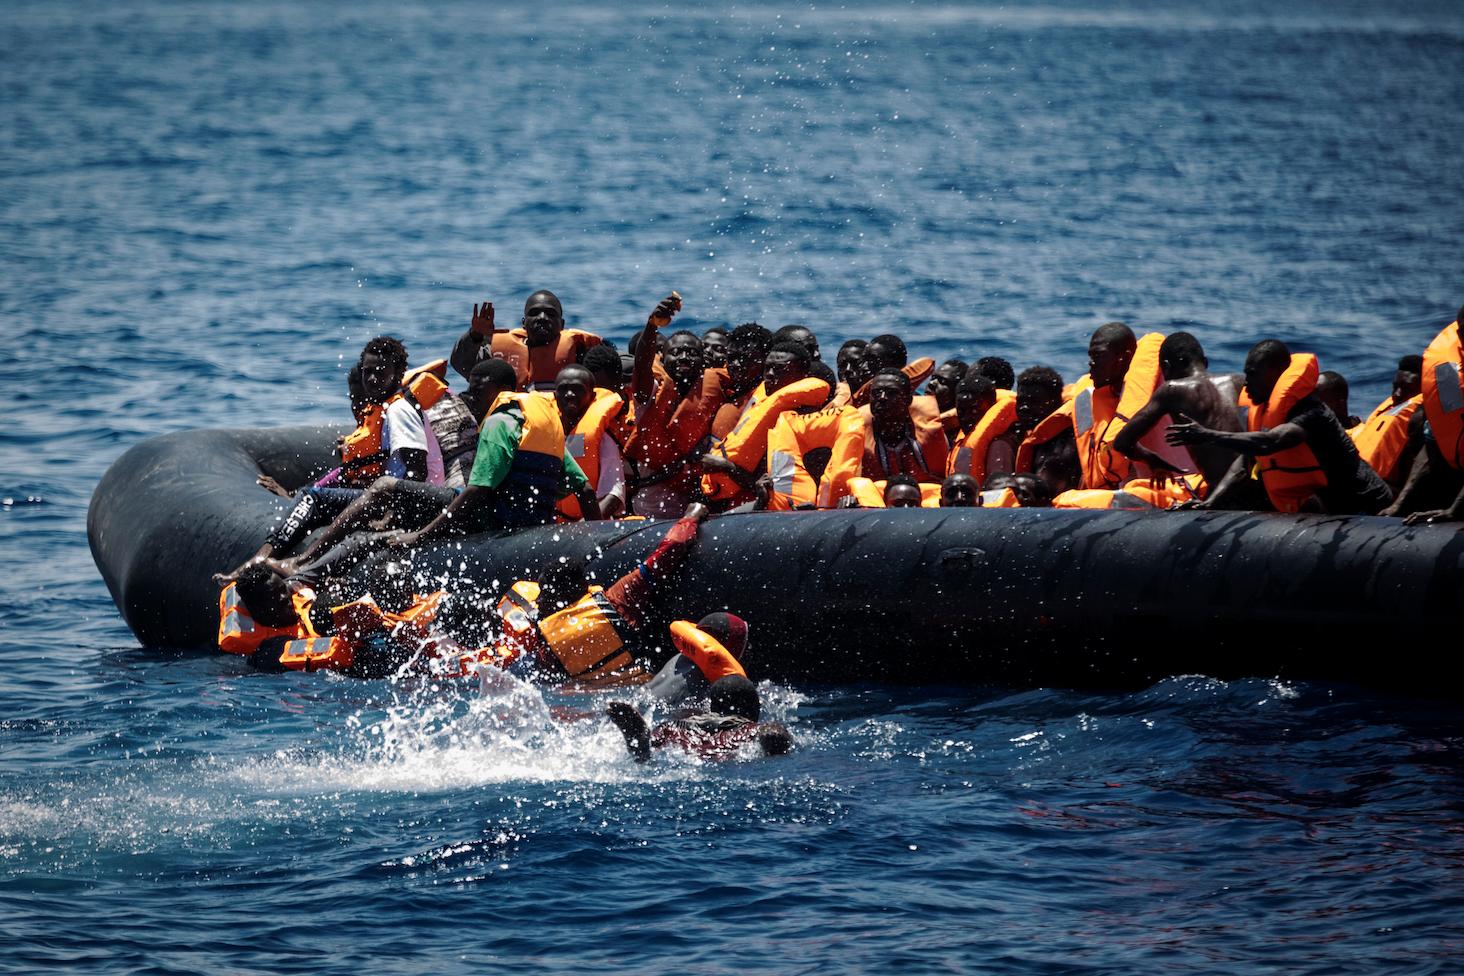 Migrants fall into the water during a rescue in the Mediterranean.